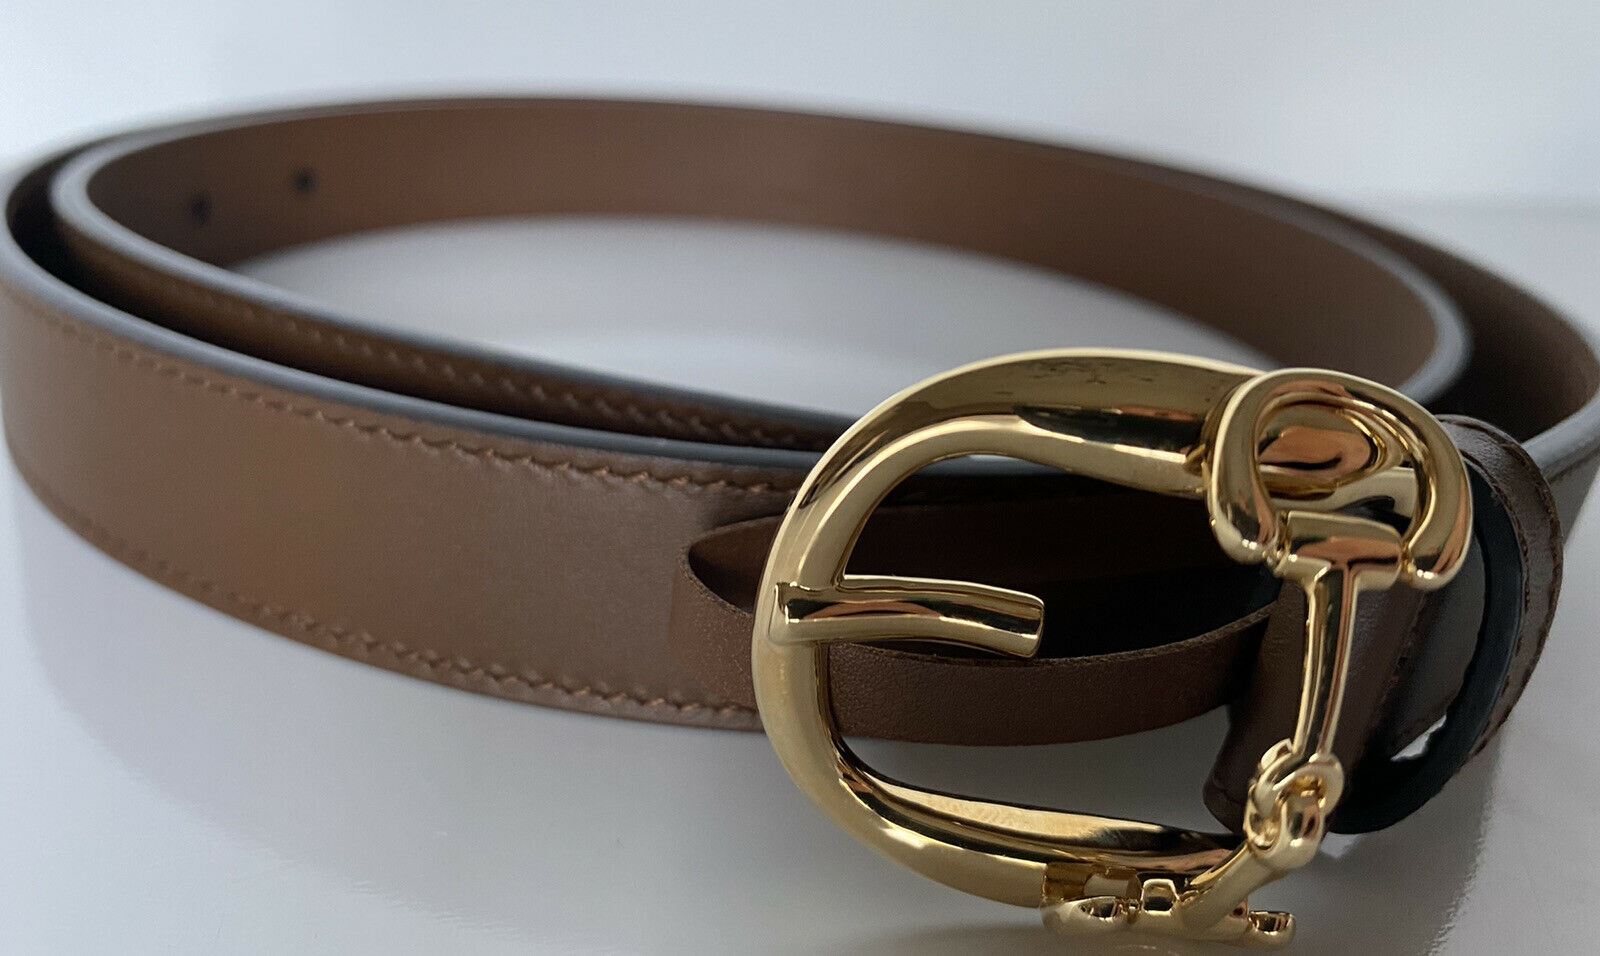 New Gucci Men's Horsebit Calf Leather Belt Brown 105/42 Made in Italy 633125